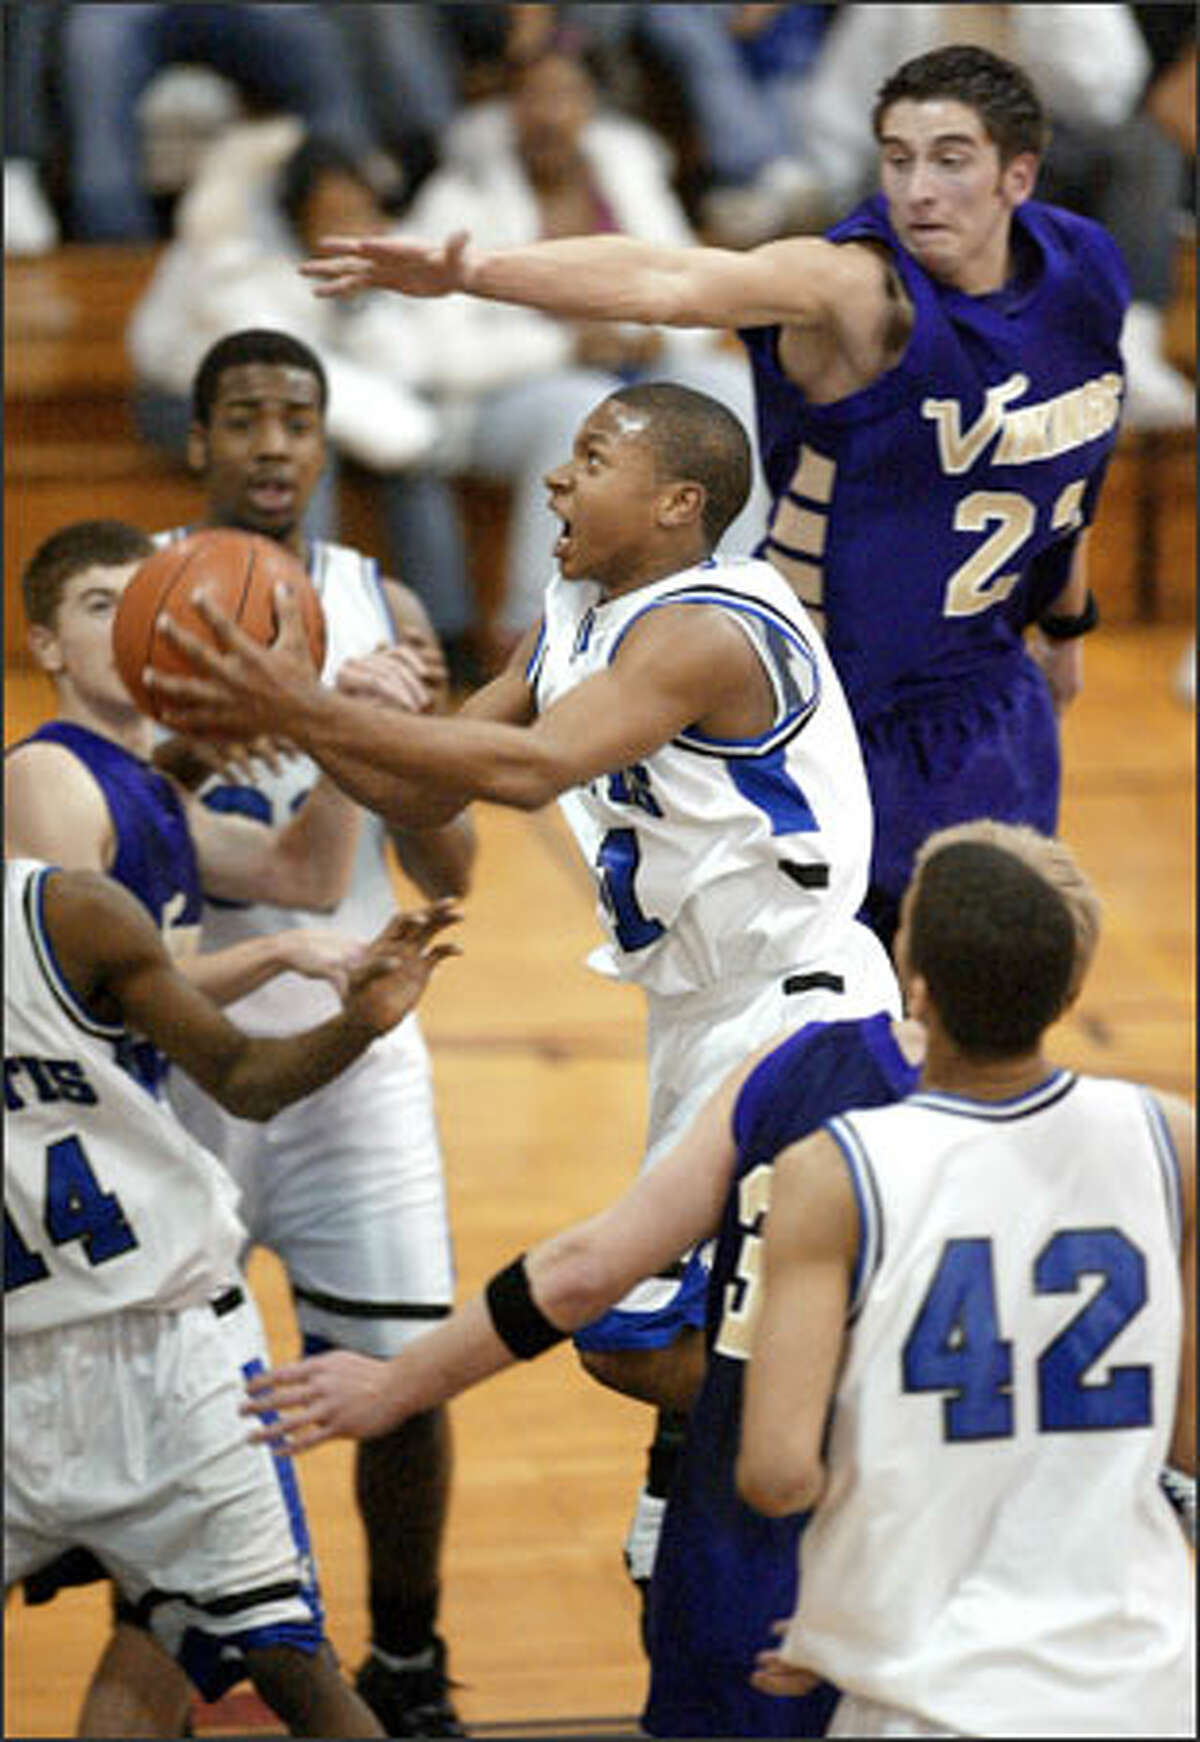 Curtis sophomore Isaiah Thomas drives past Puyallup's Austin Kilpatrick during their SPSL game Tuesday. Thomas scored 22 points in a 55-43 victory.